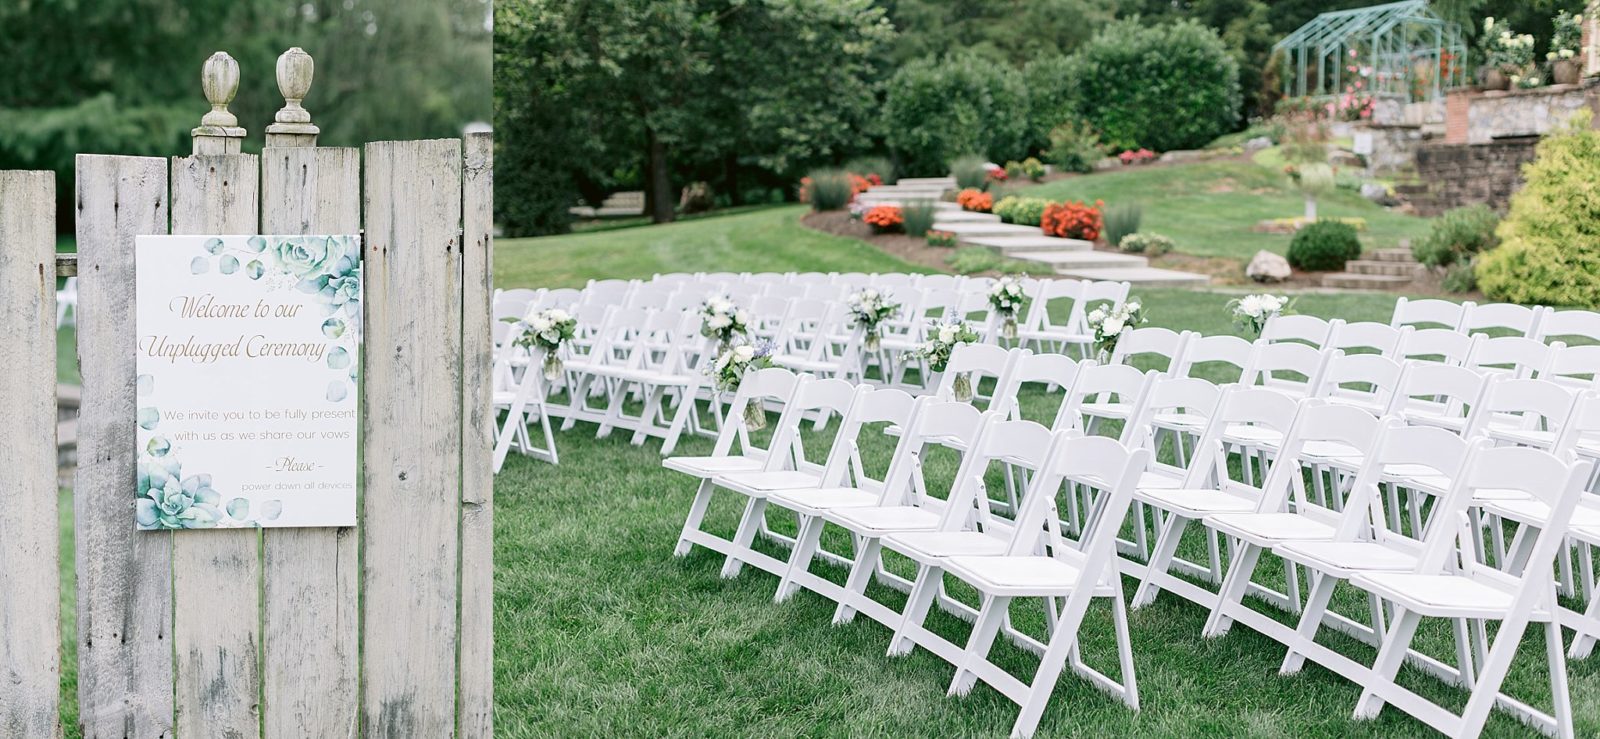 image shows rows of white chairs and an arch decorated with greenery, all set up for an outdoor wedding by the pond at historic acres of hershey